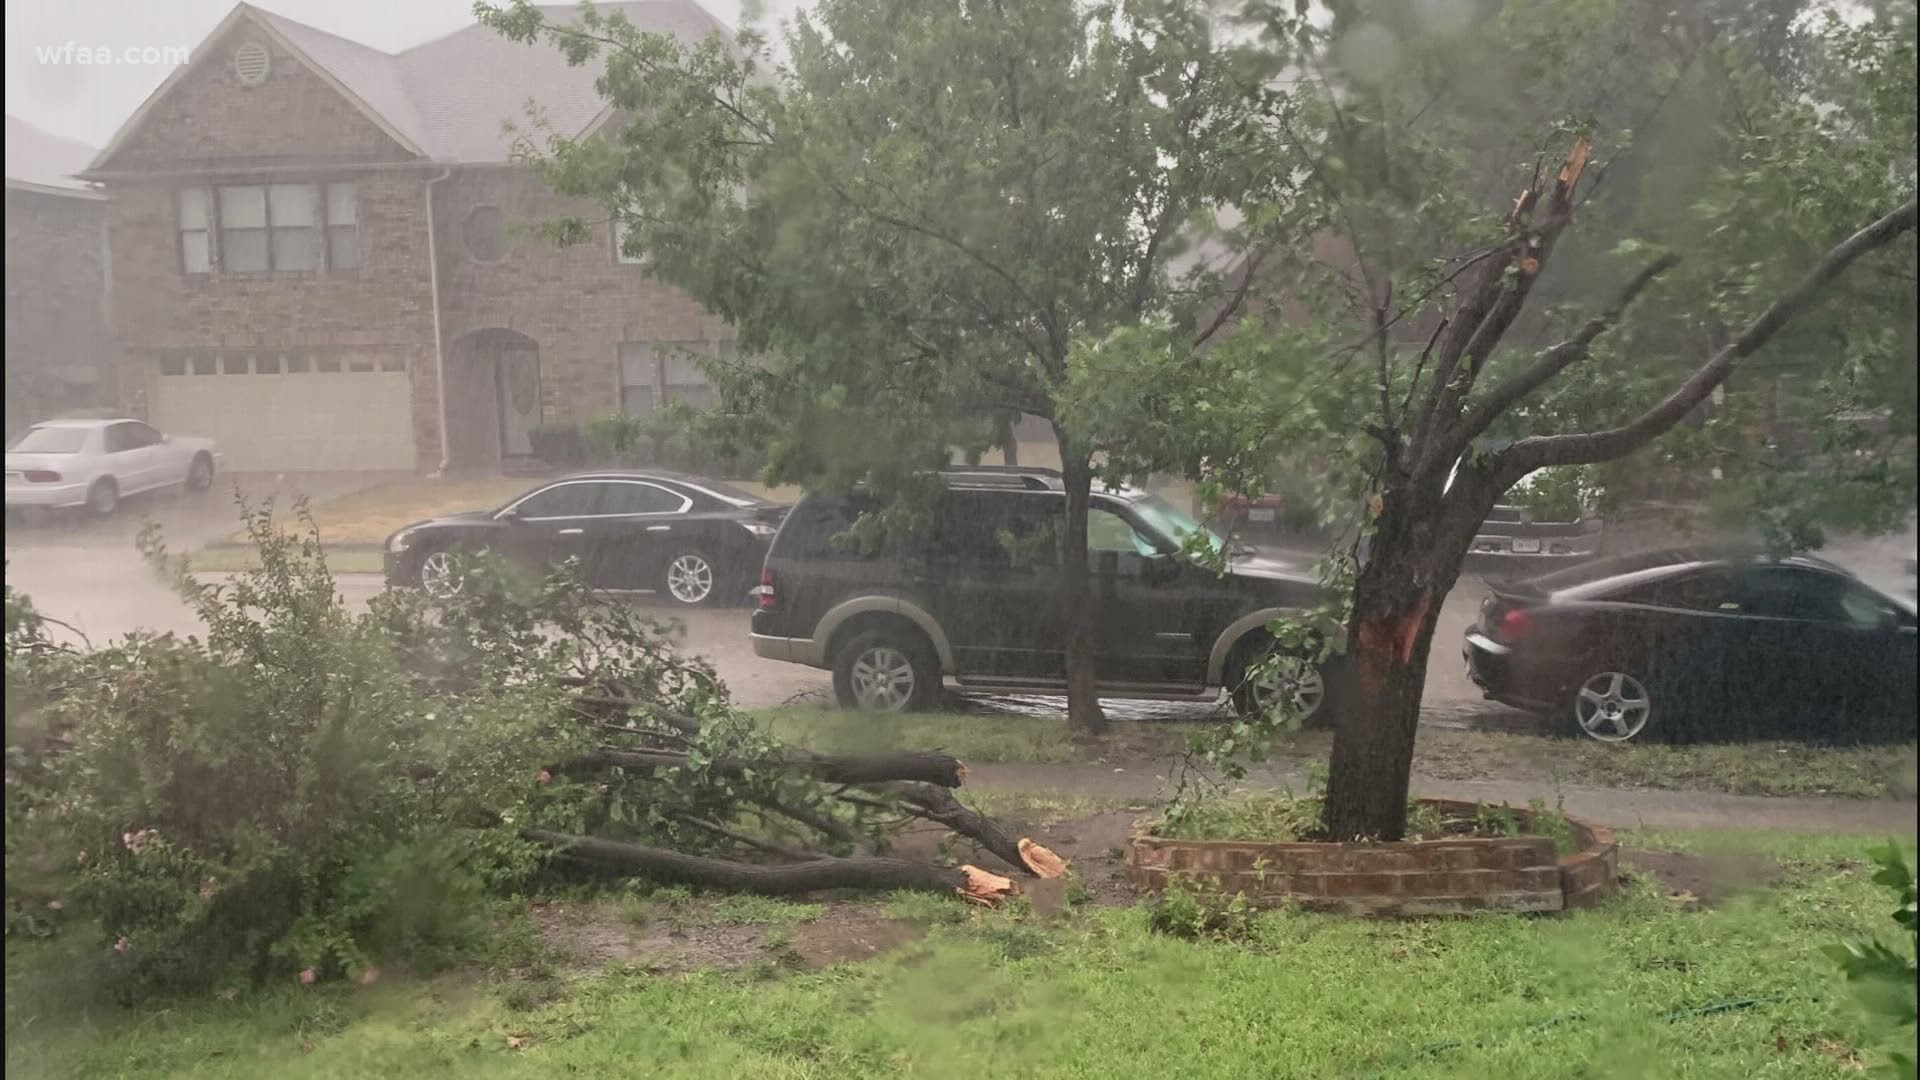 The Tarrant County Sheriff's Office was warning people to avoid the Briar area after high winds caused downed power lines and trees.